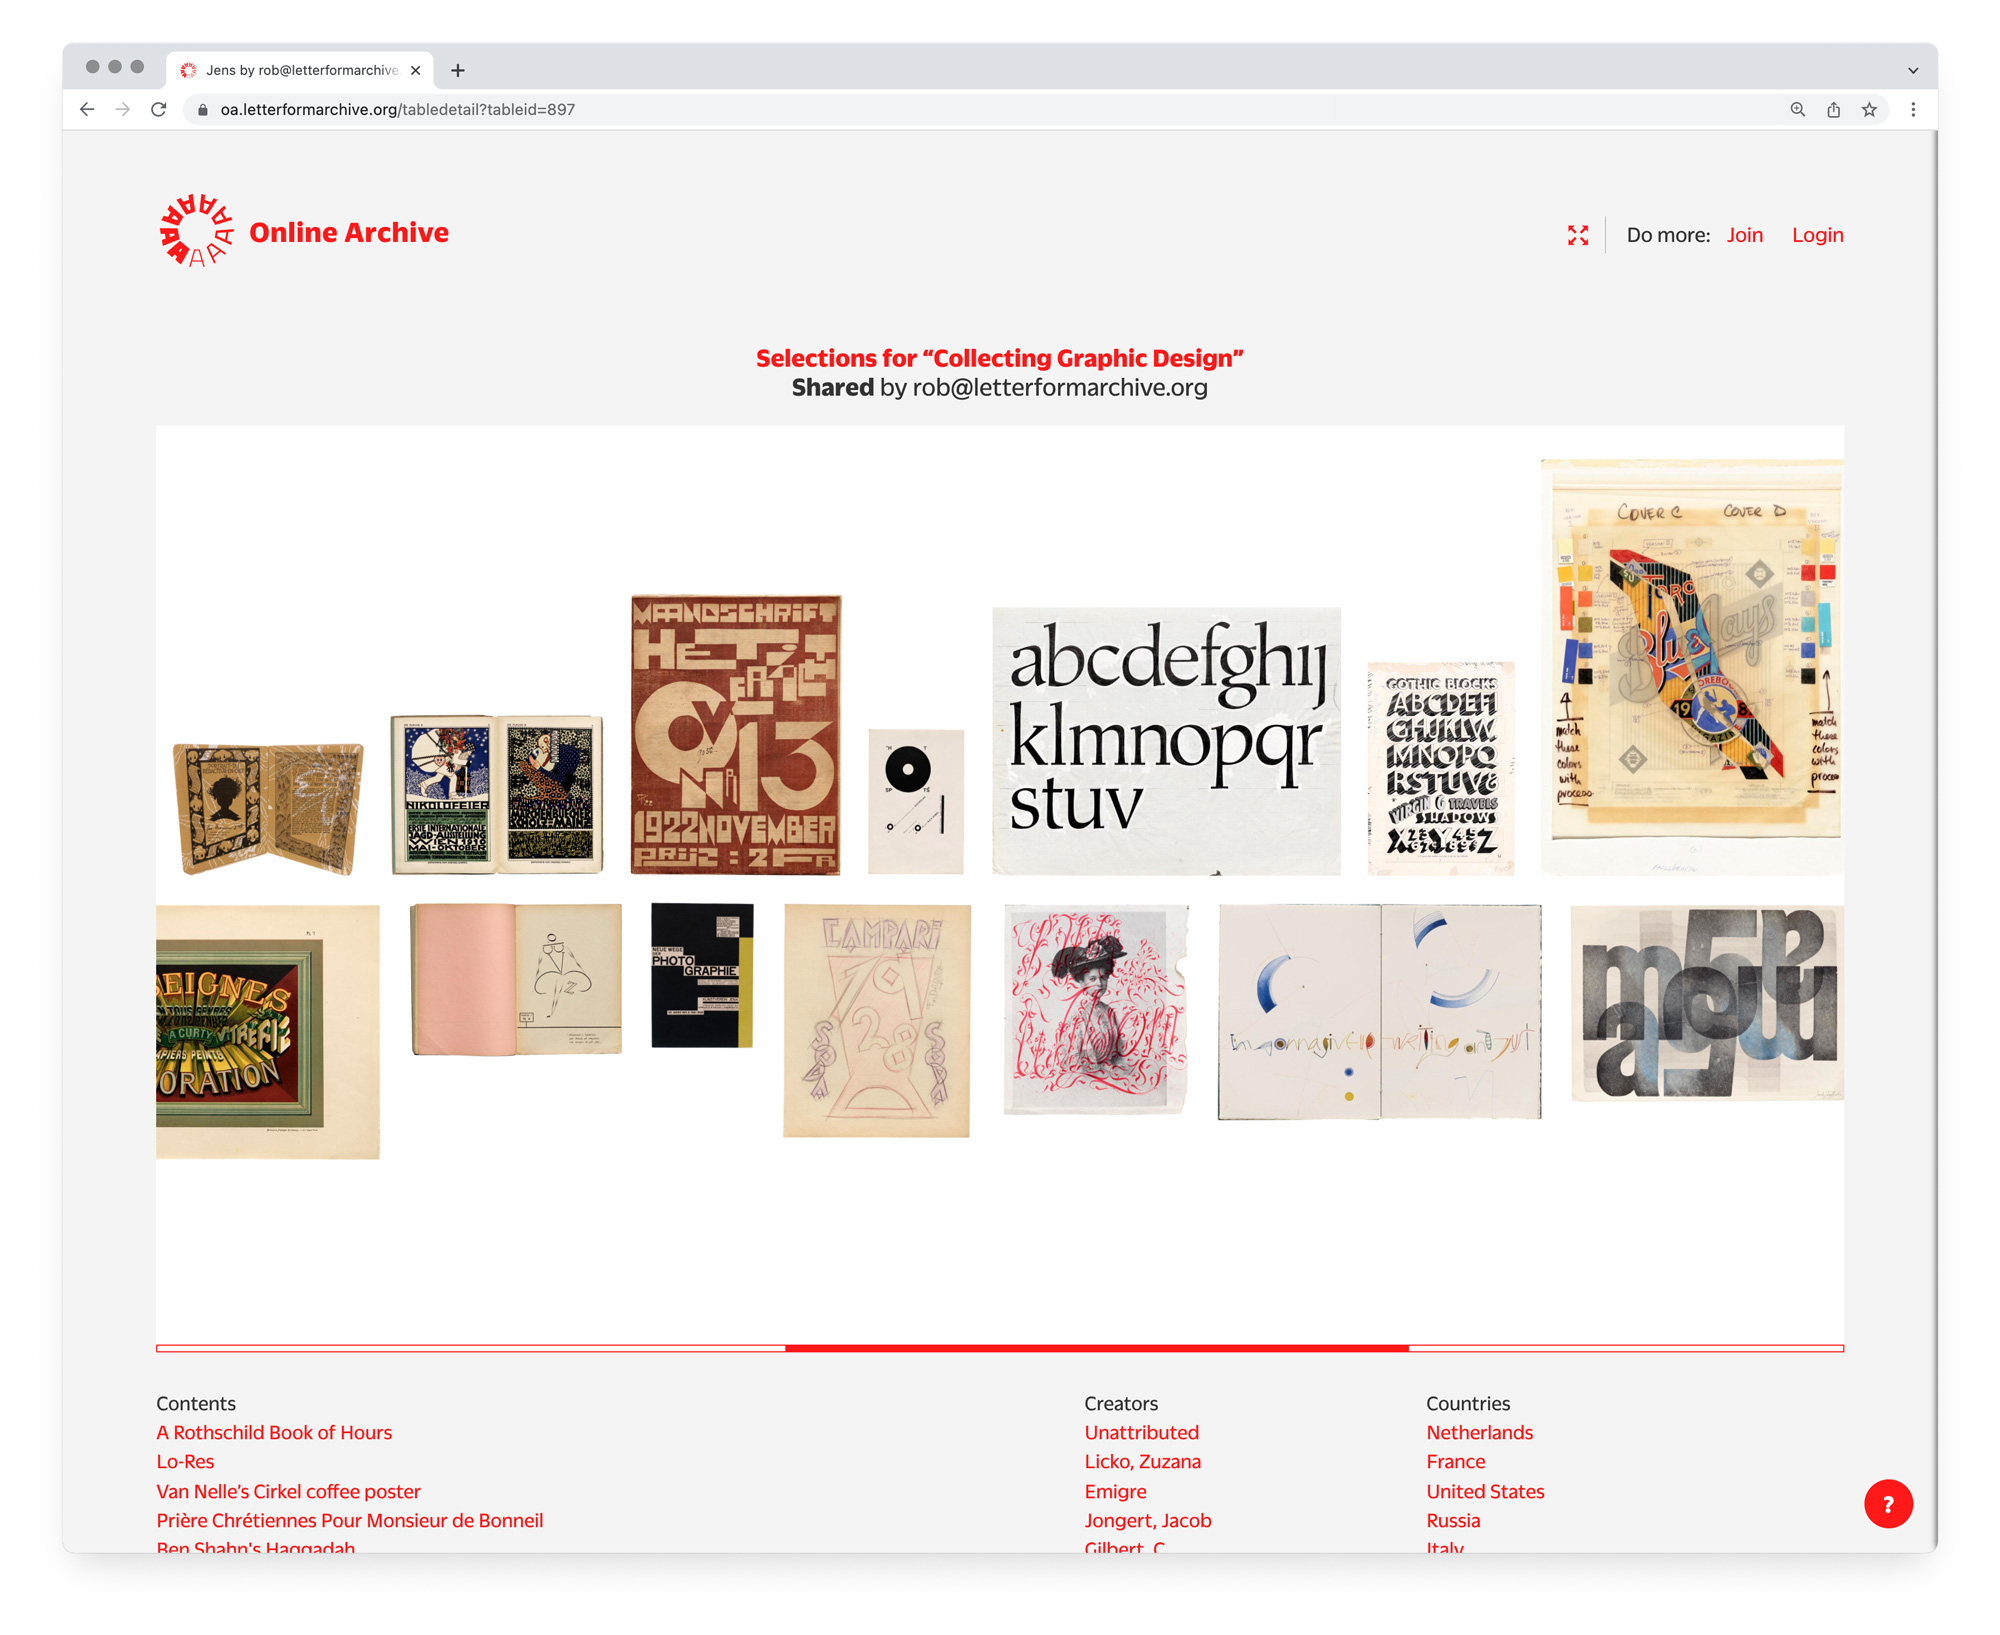 An Online Archive Table with selections for Collecting Graphic Design